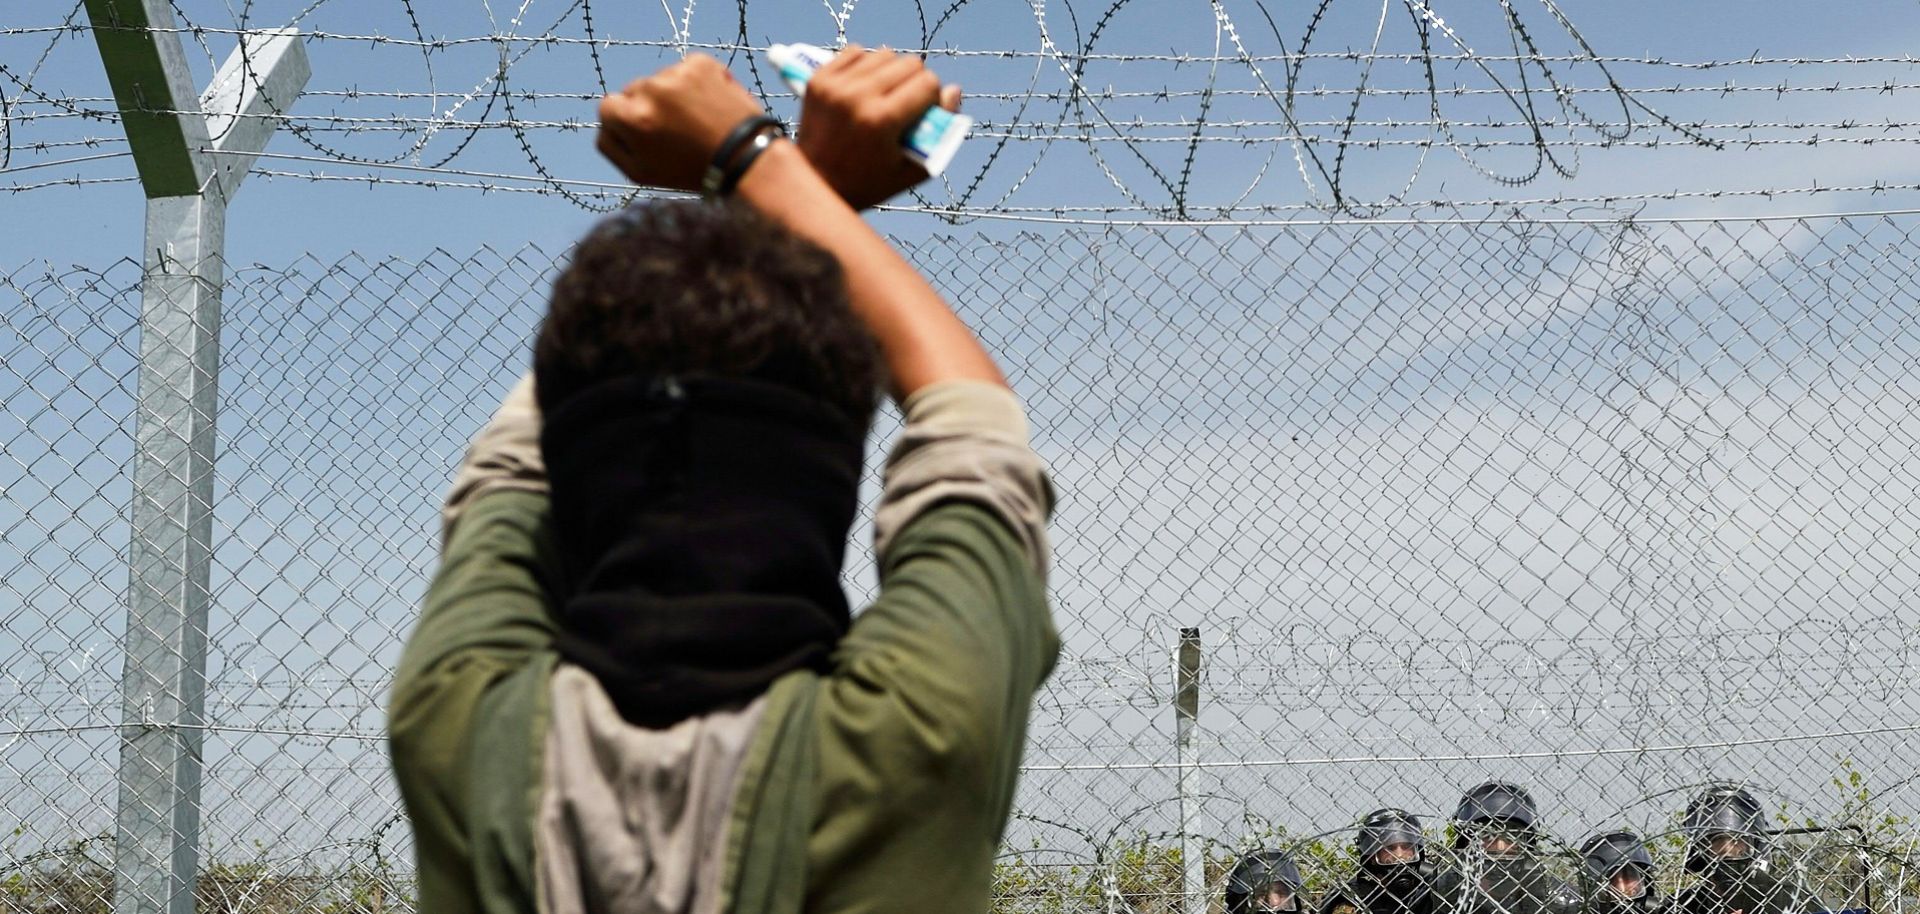 Refugees protest at the Greece-Macedonia border, calling for it to be reopened.